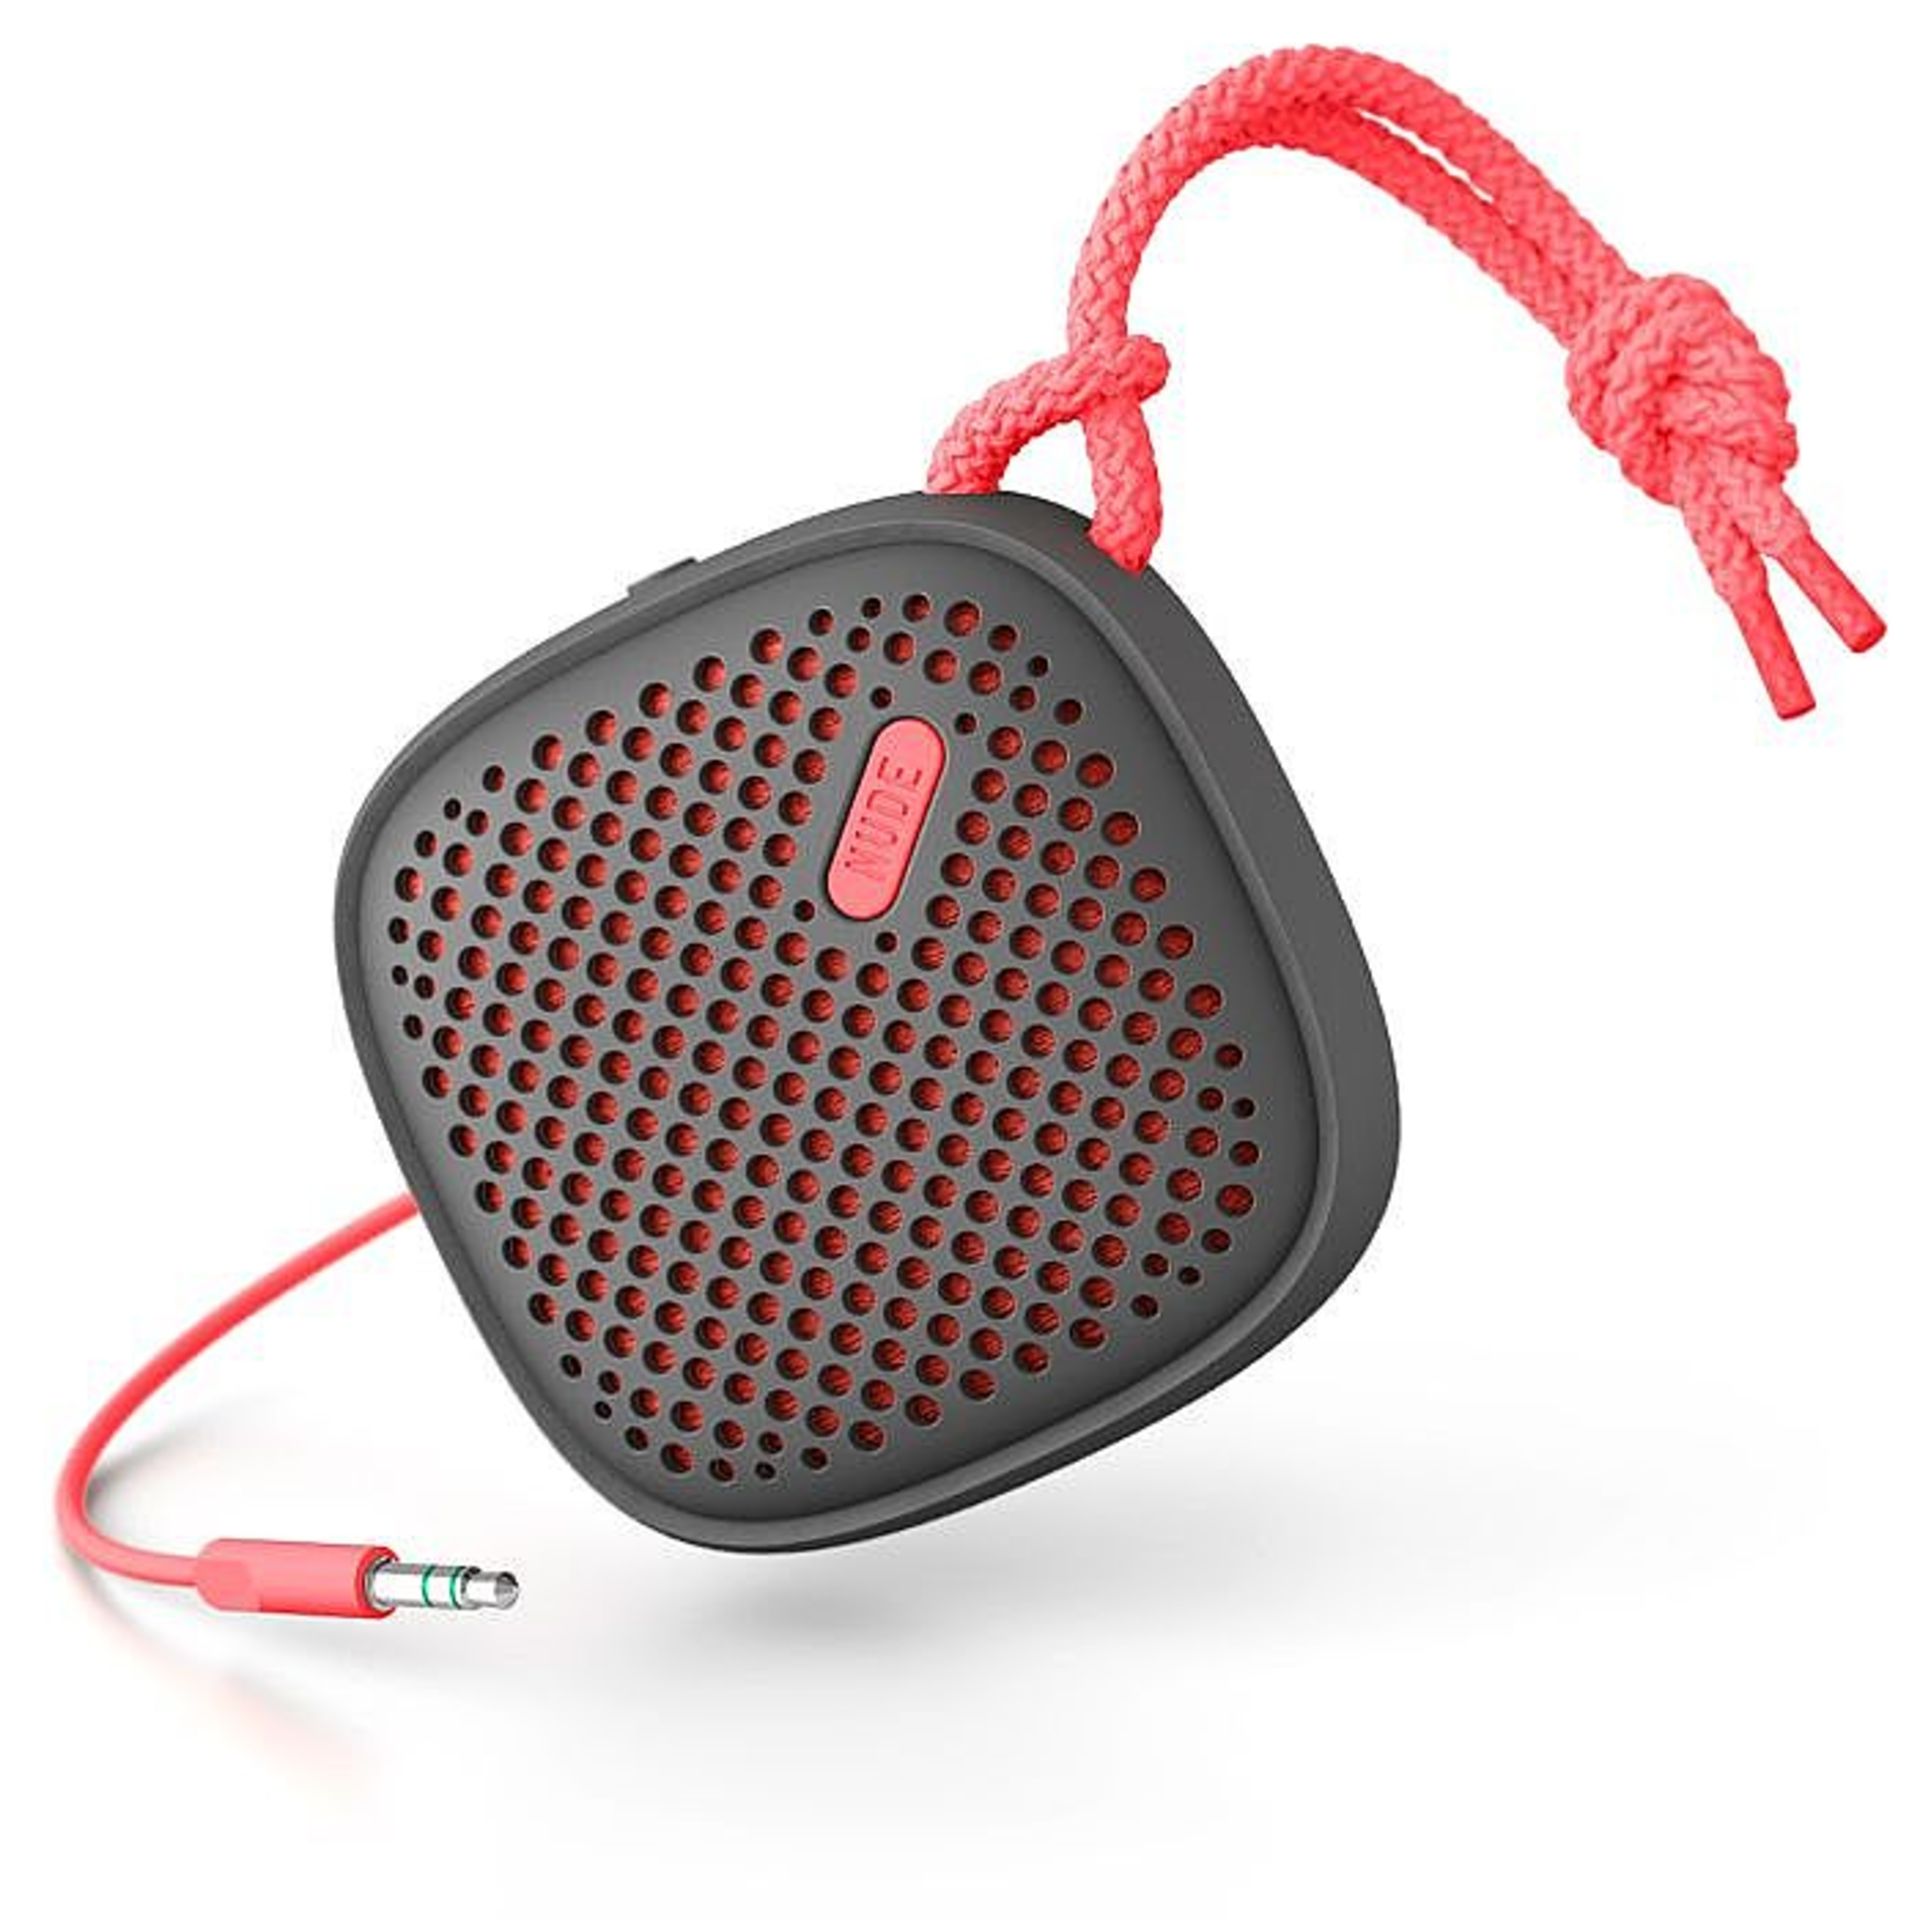 V *TRADE QTY* Brand New Nude Audio Move S Wired Portable Speaker - Coral X 60 YOUR BID PRICE TO BE